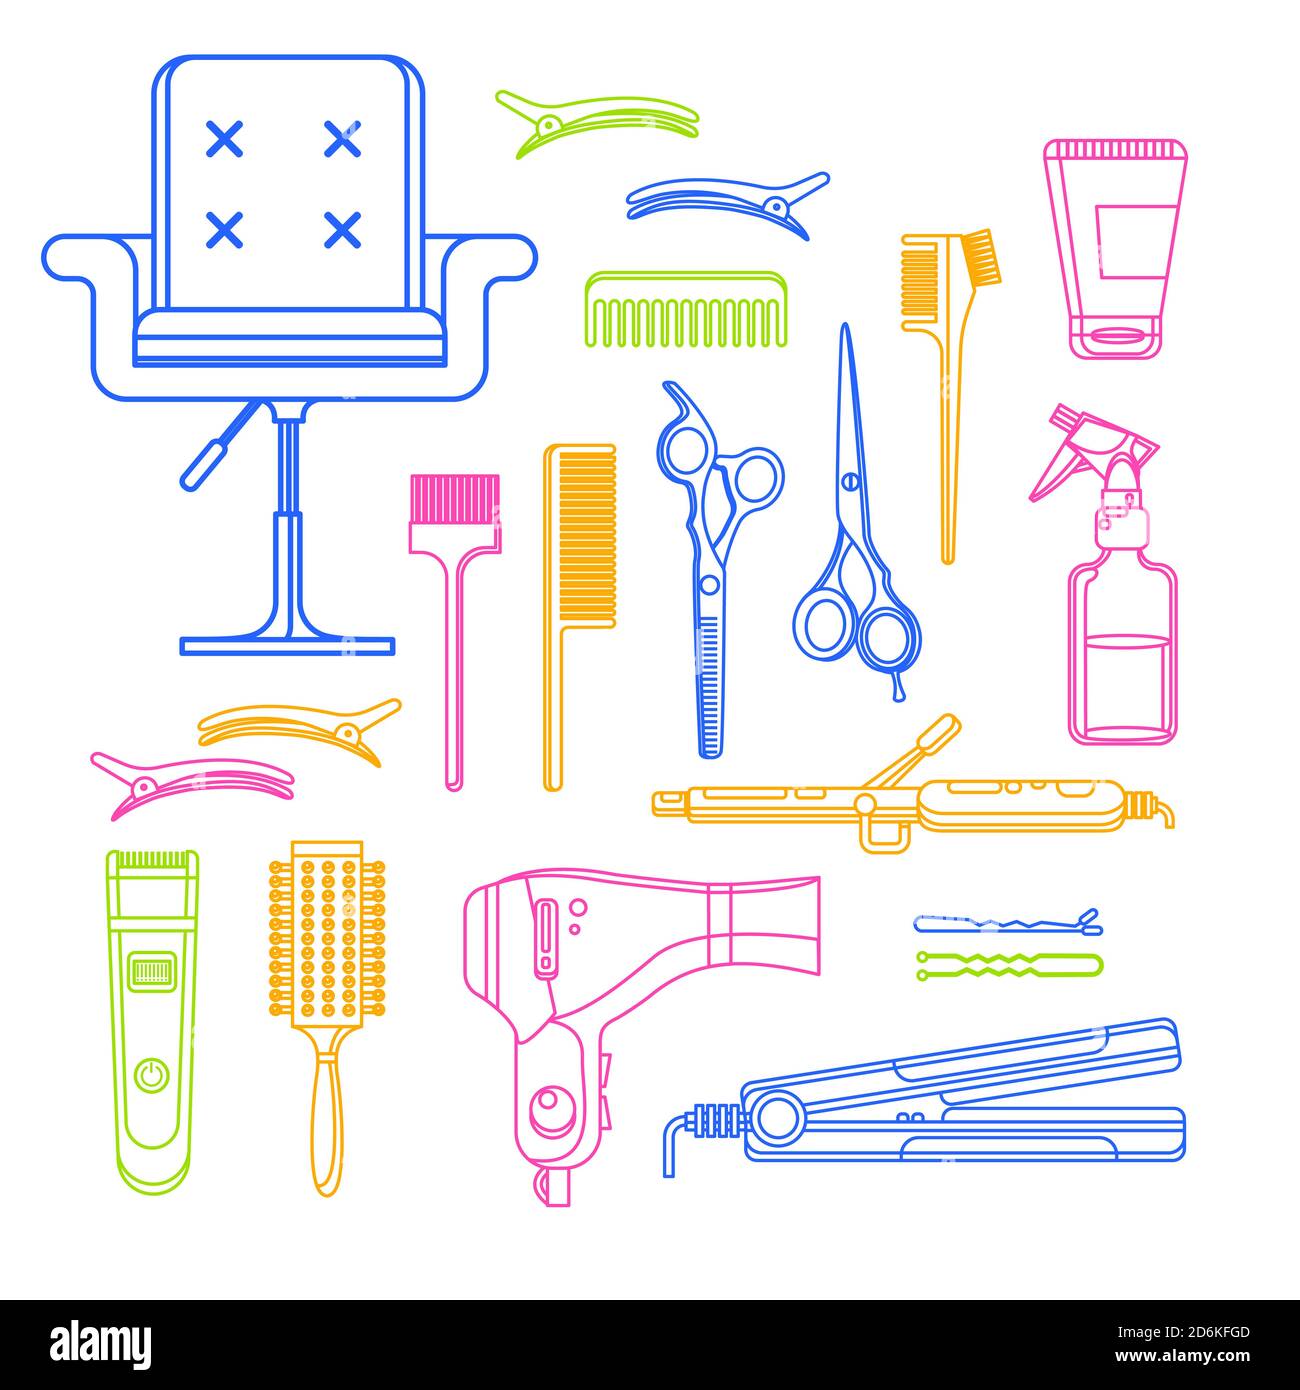 Beauty salon vector linear icons and design elements. Hair hairdresser tools and equipment isolated on white background. Stock Vector